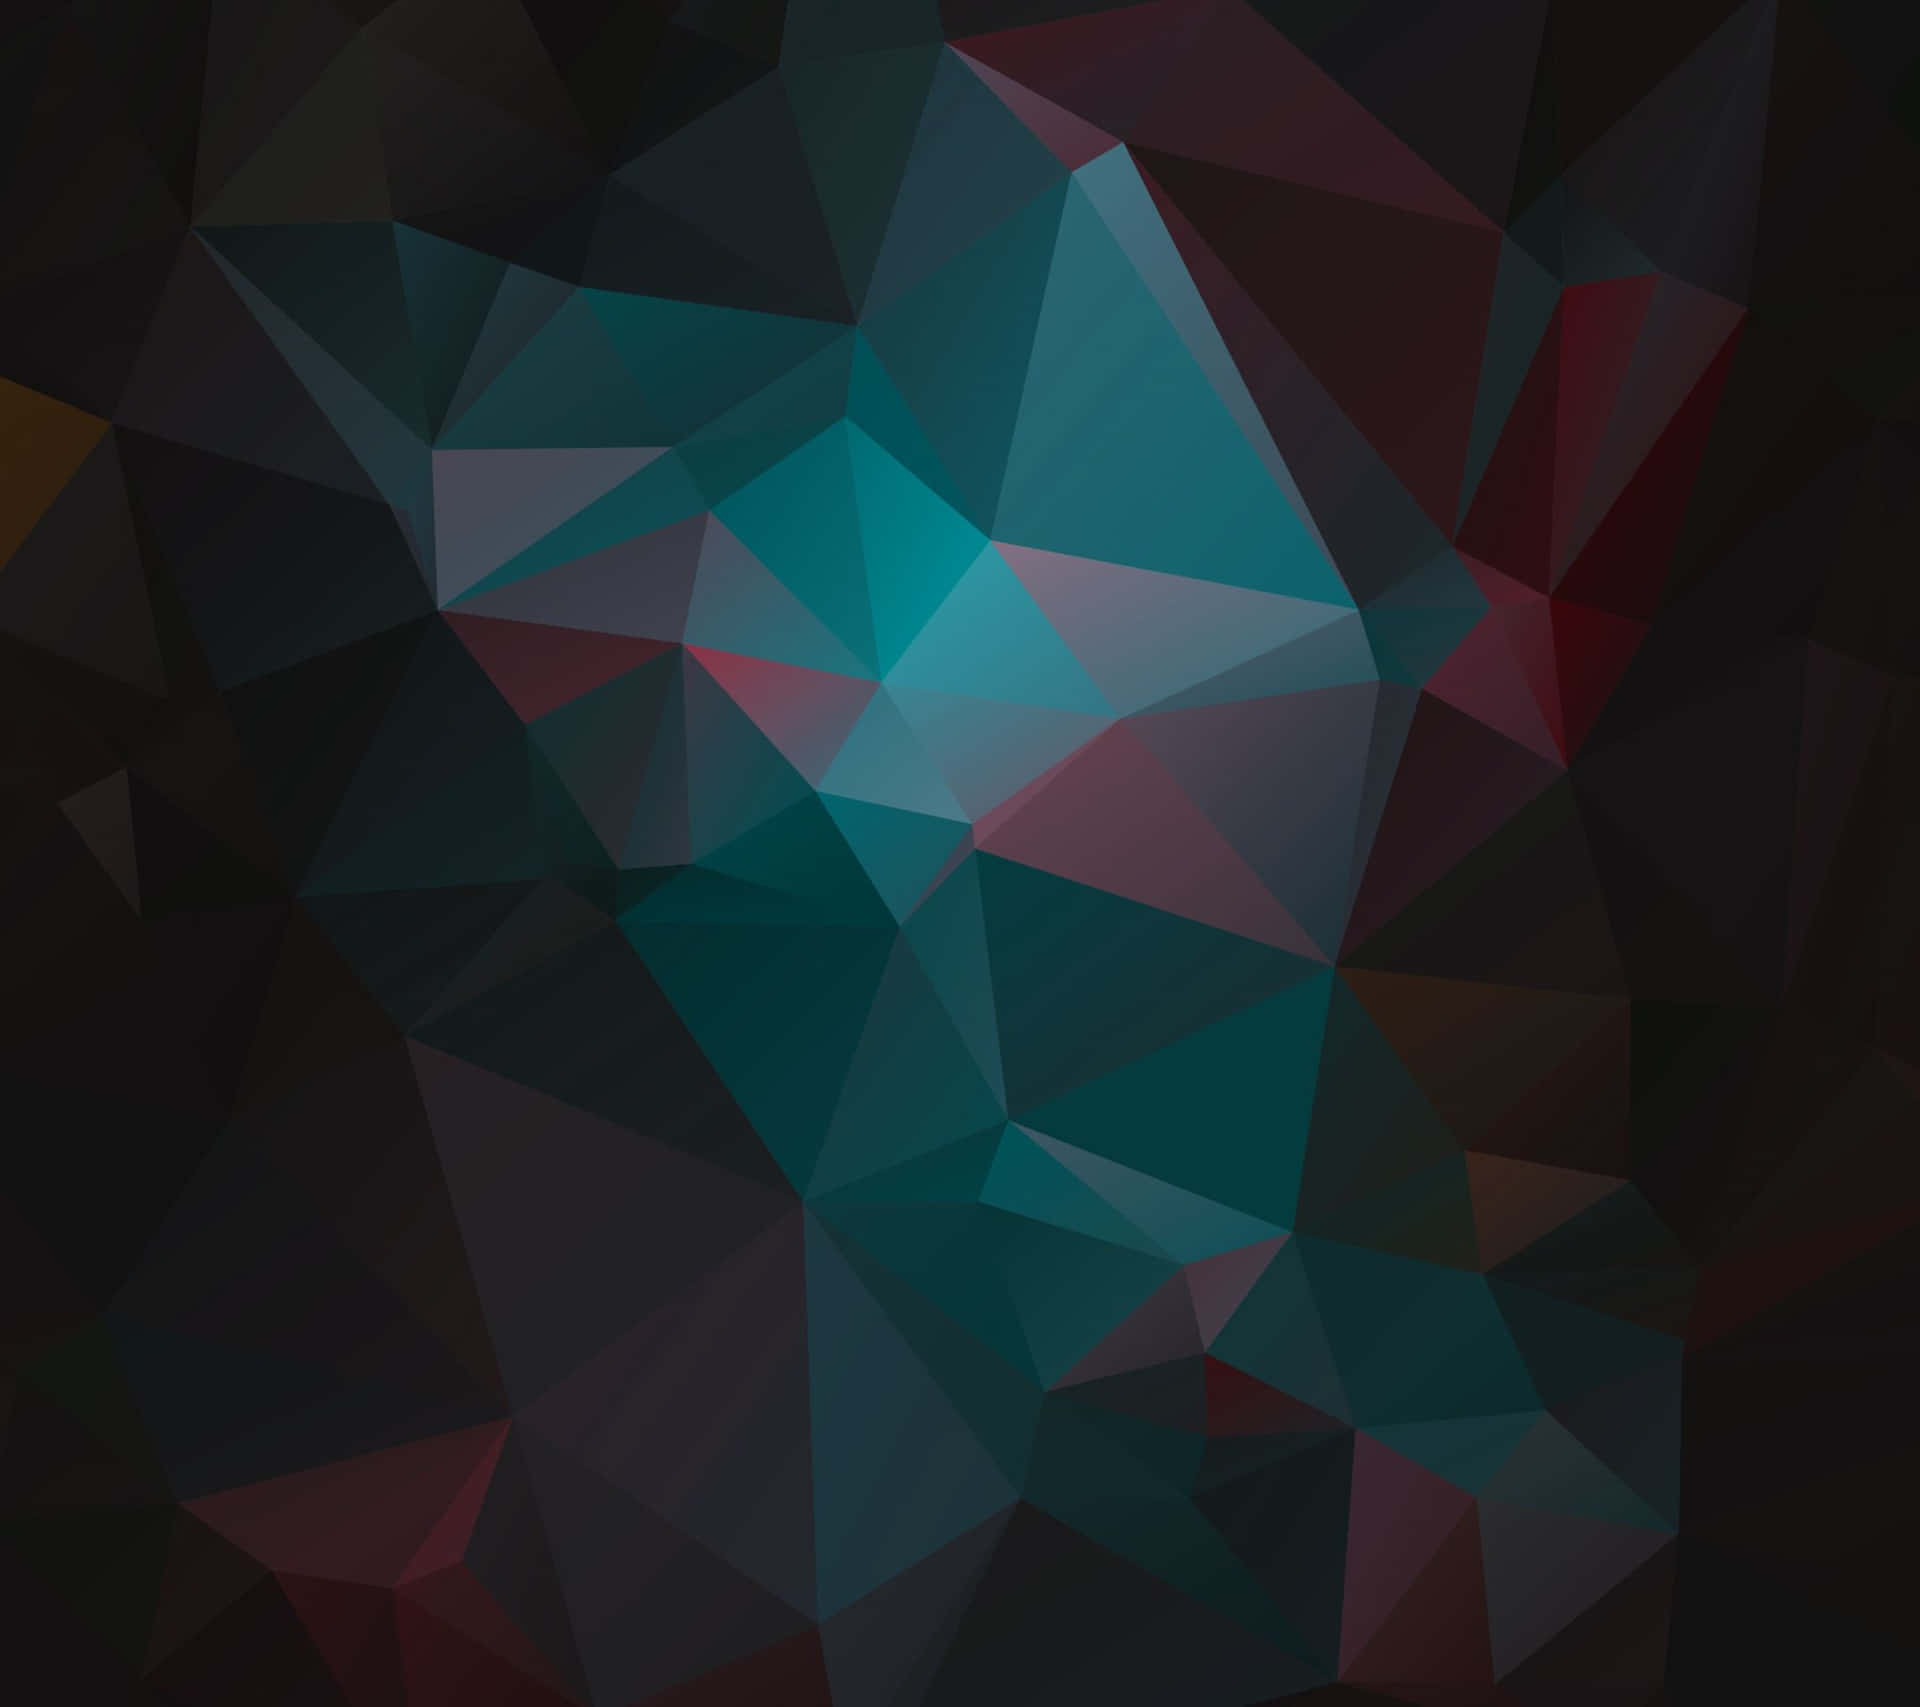 Enjoy the mesmerizing shapes of a Polygon background